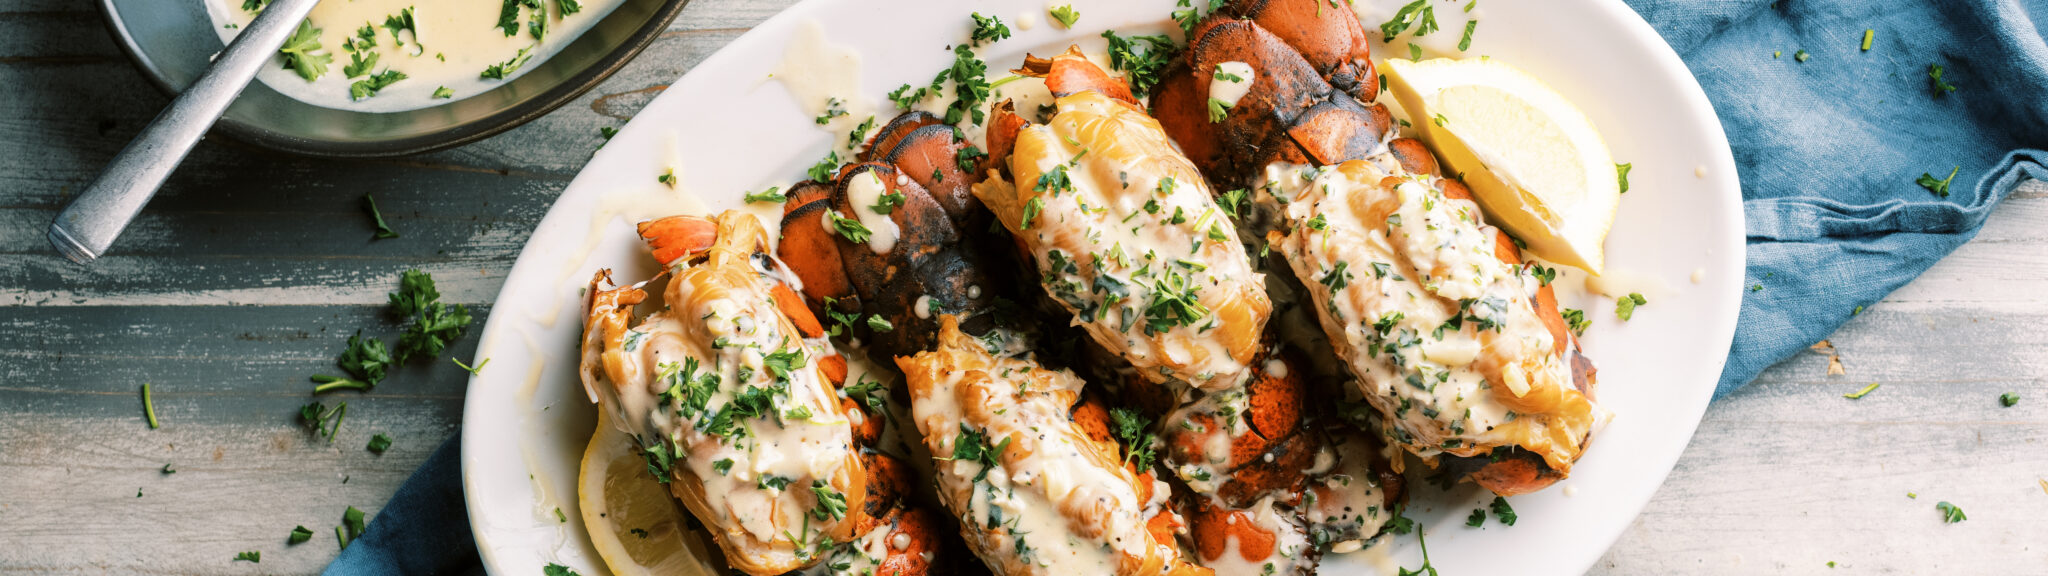 Smoked Maine Lobster With Garlic Butter Cream Sauce recipe image